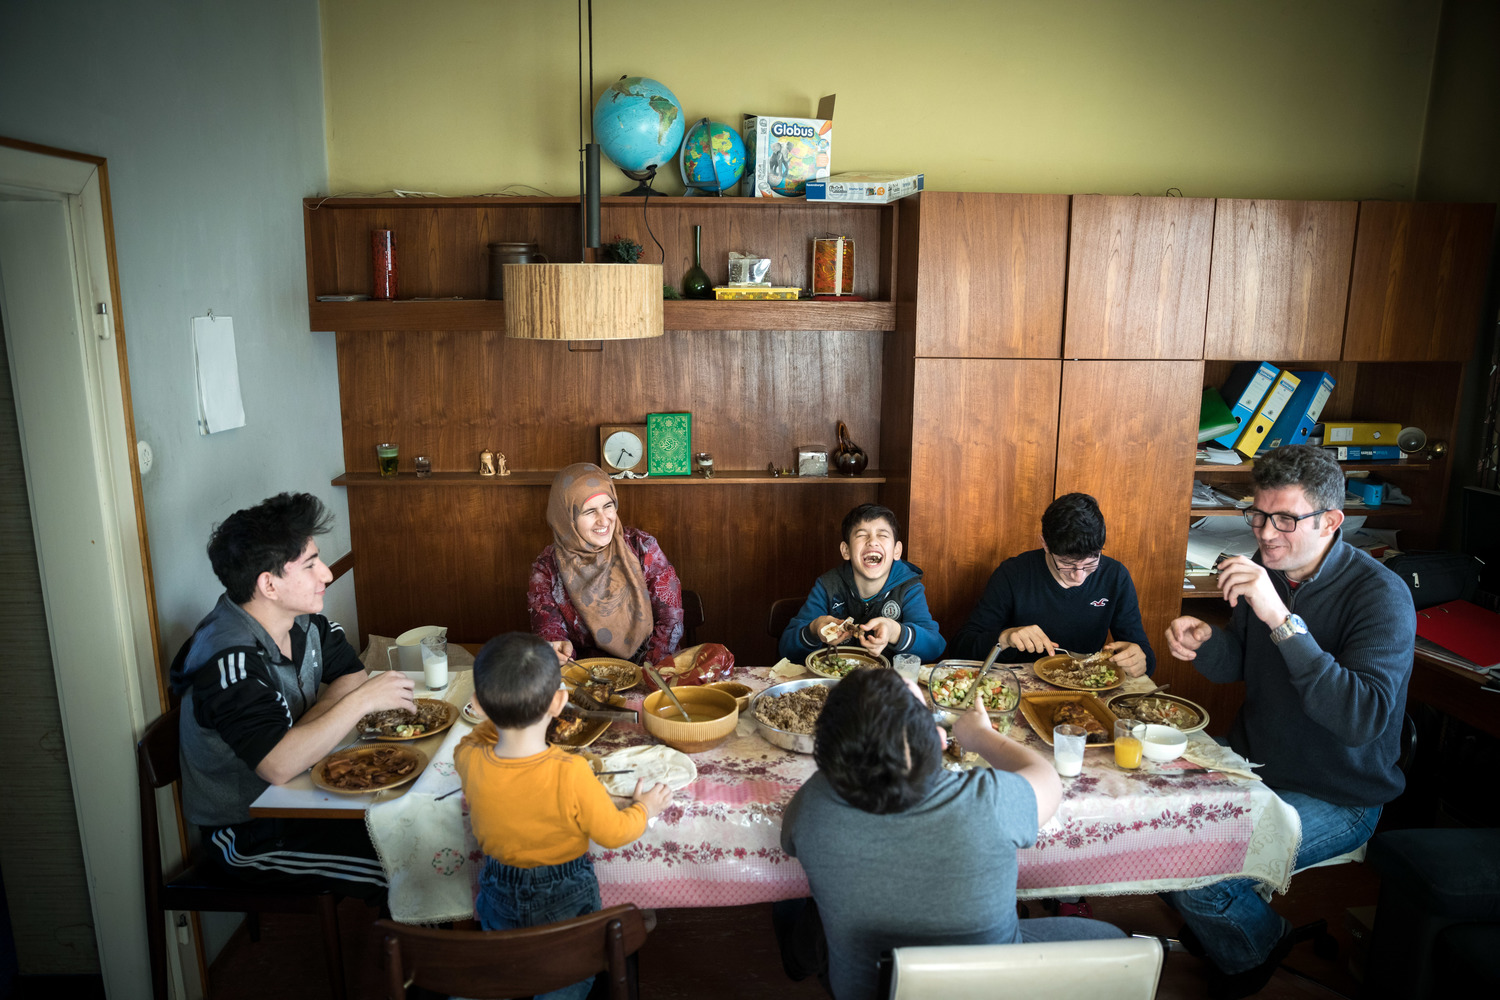 Austria. Refugees long for reunion with loved ones left behind.